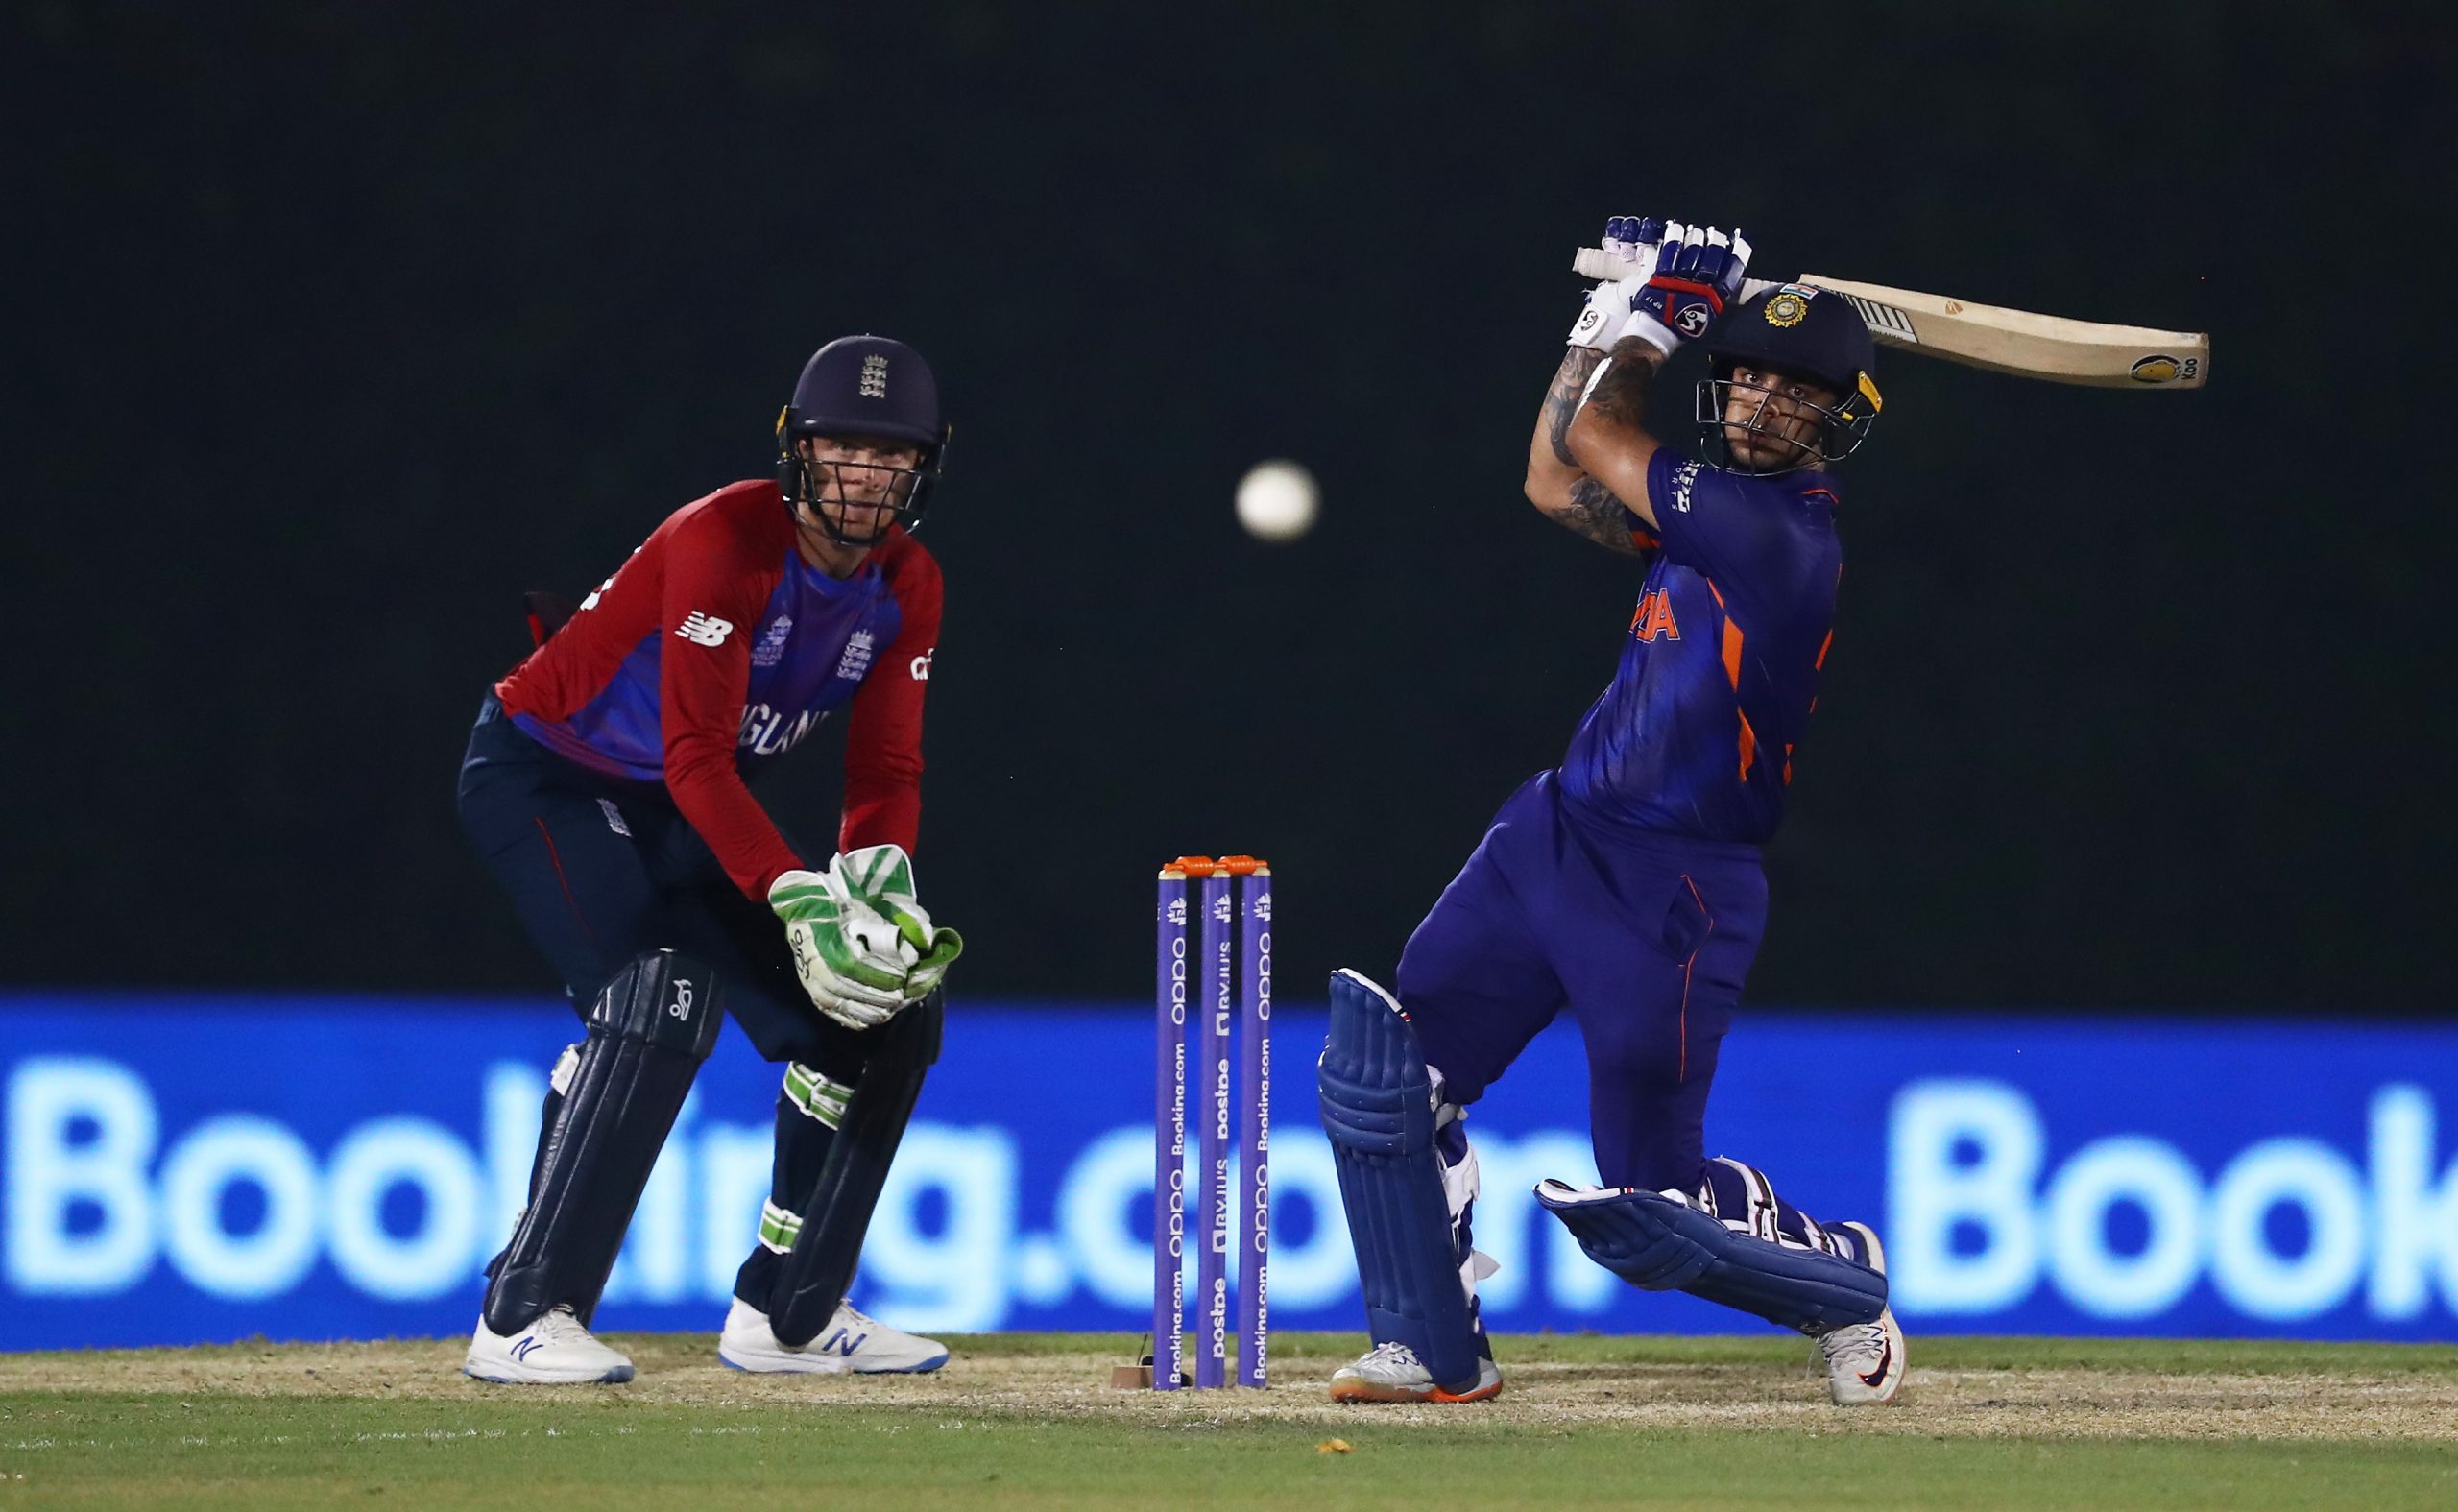 Watch: Ind vs Eng T20 World cup warm-up HIGHLIGHTS